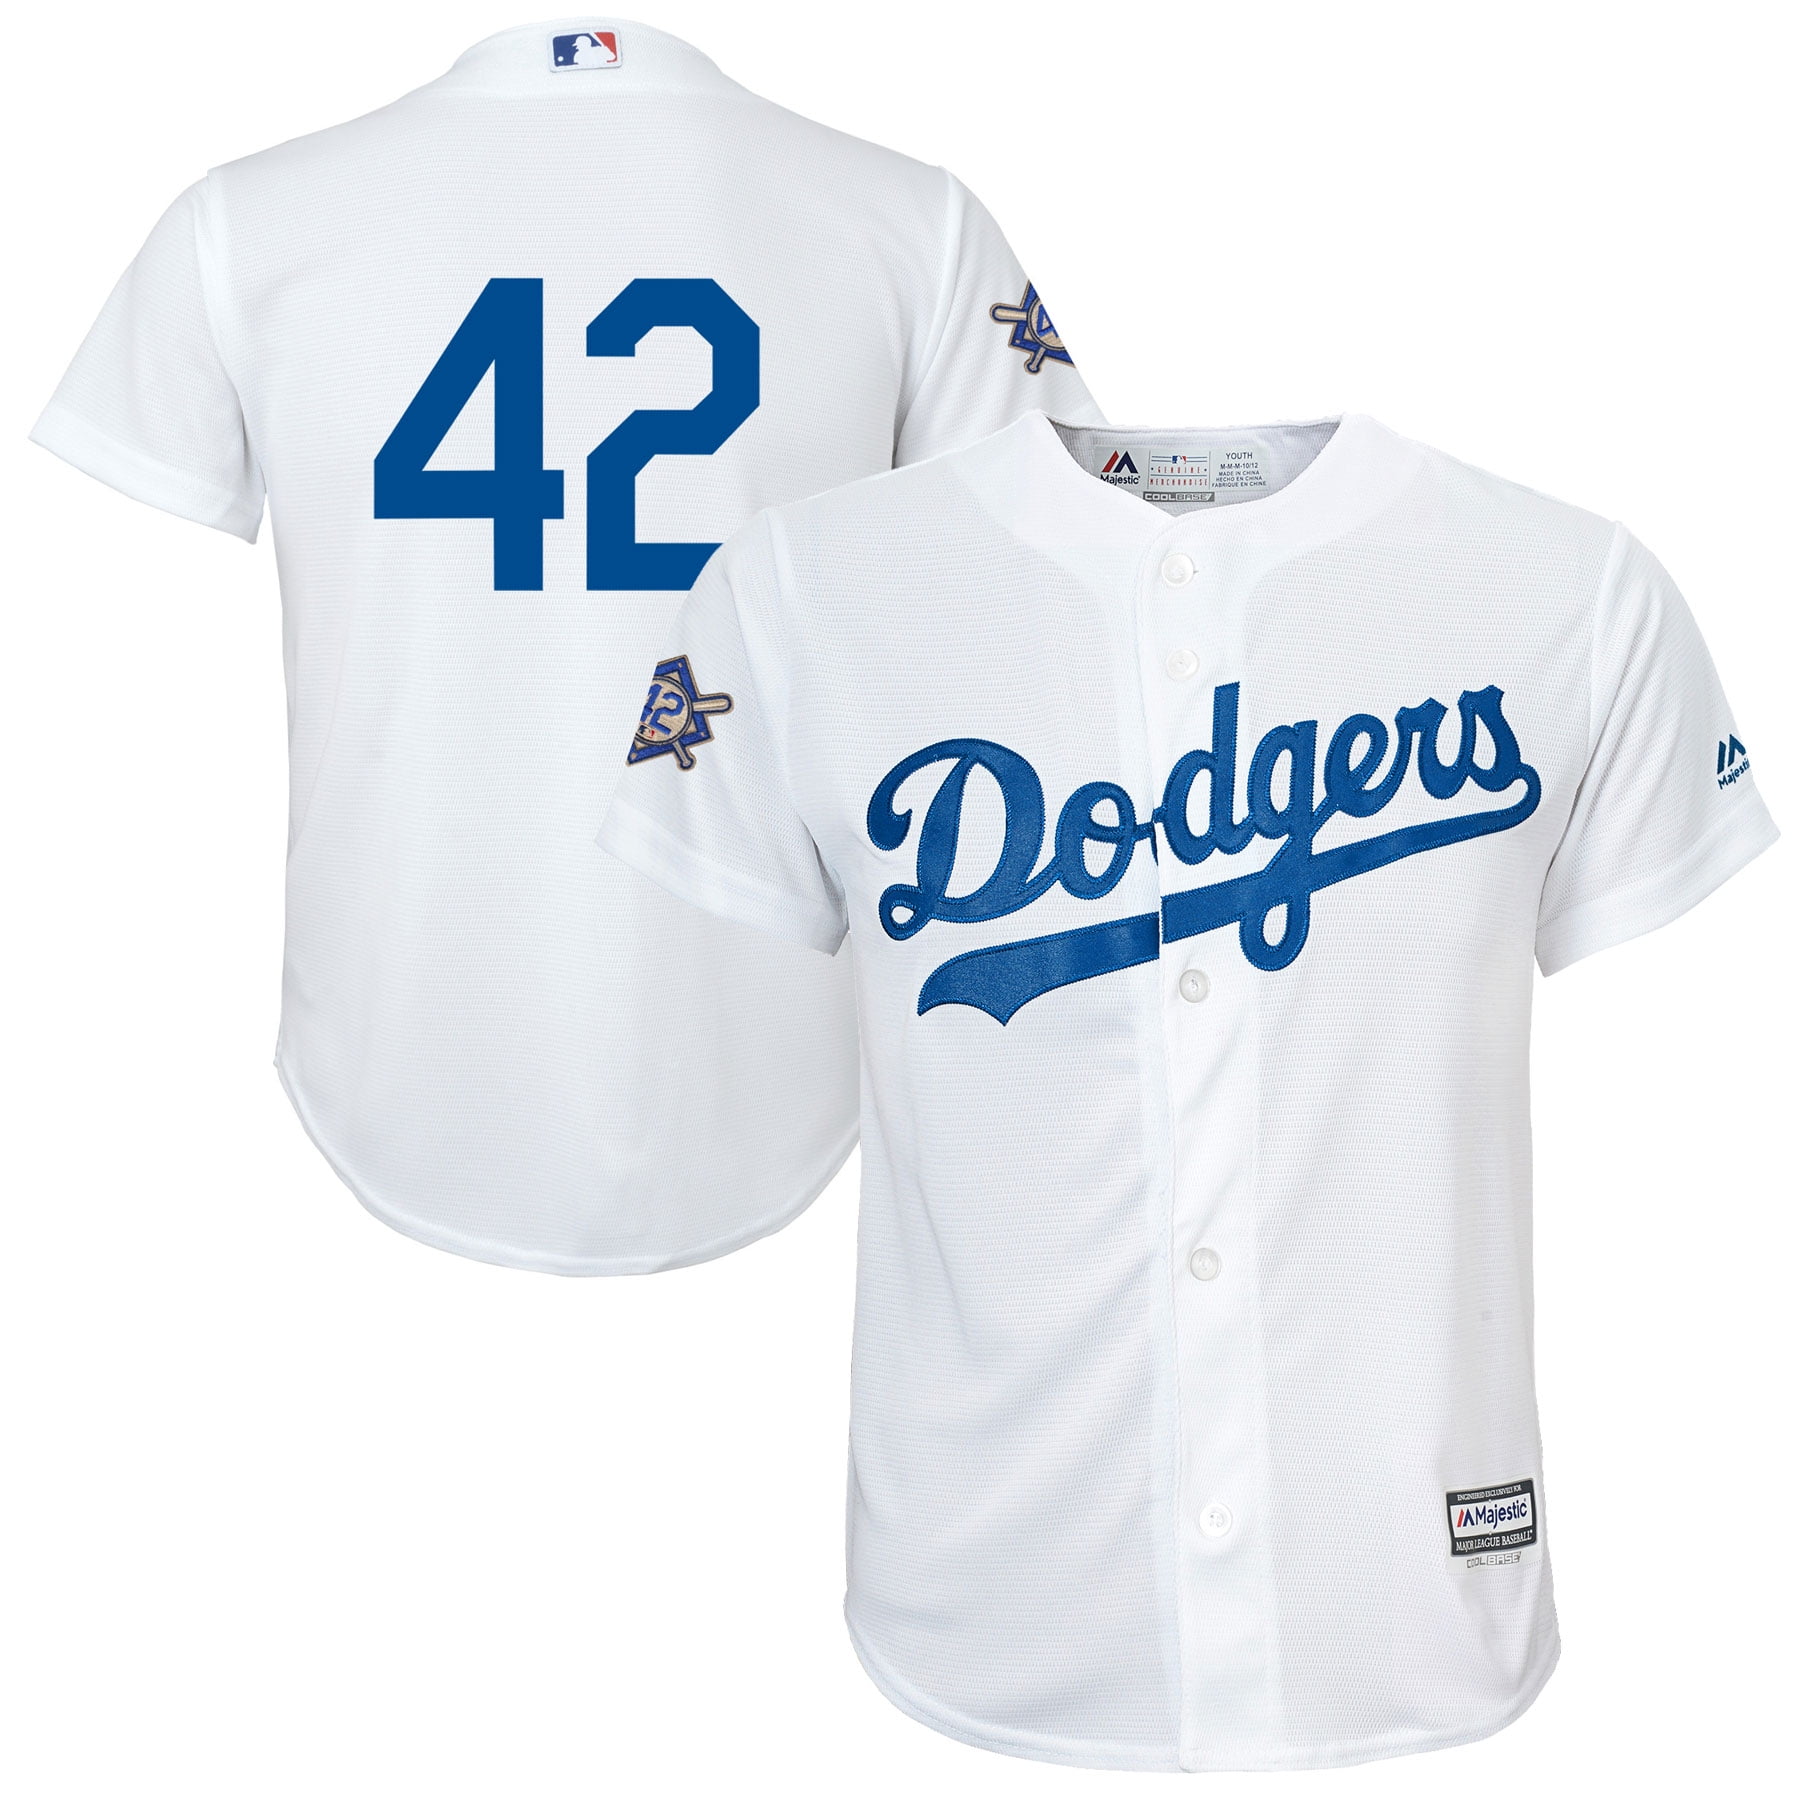 jackie robinson jersey day dodgers